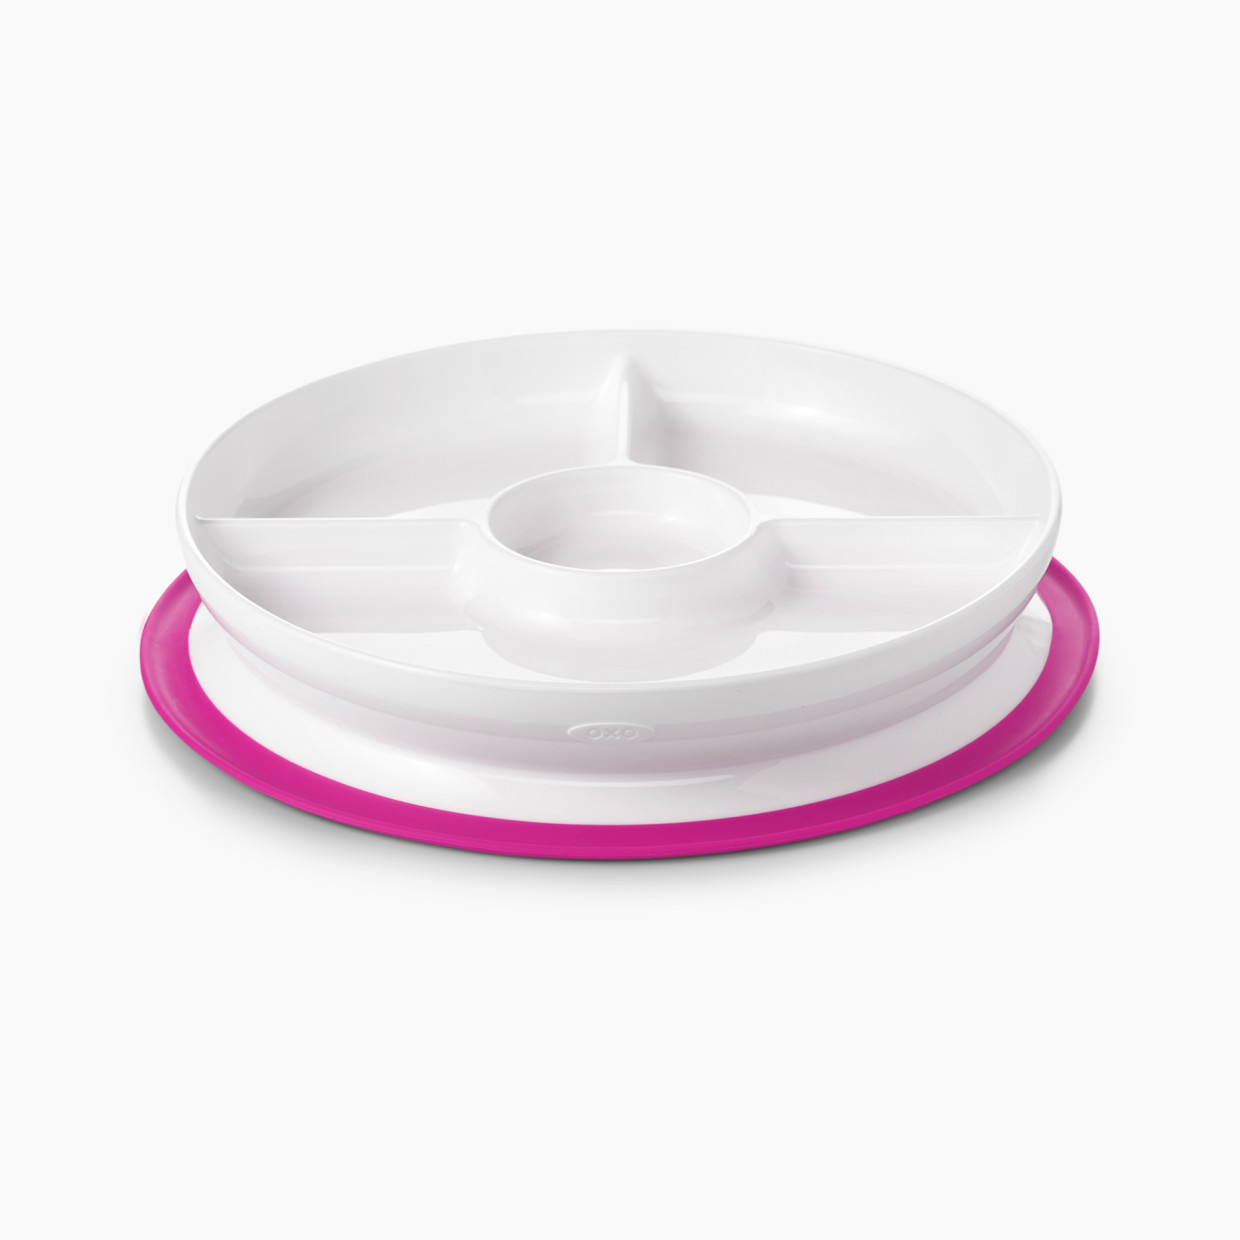 OXO Tot Stick & Stay Divided Plate - Pink.